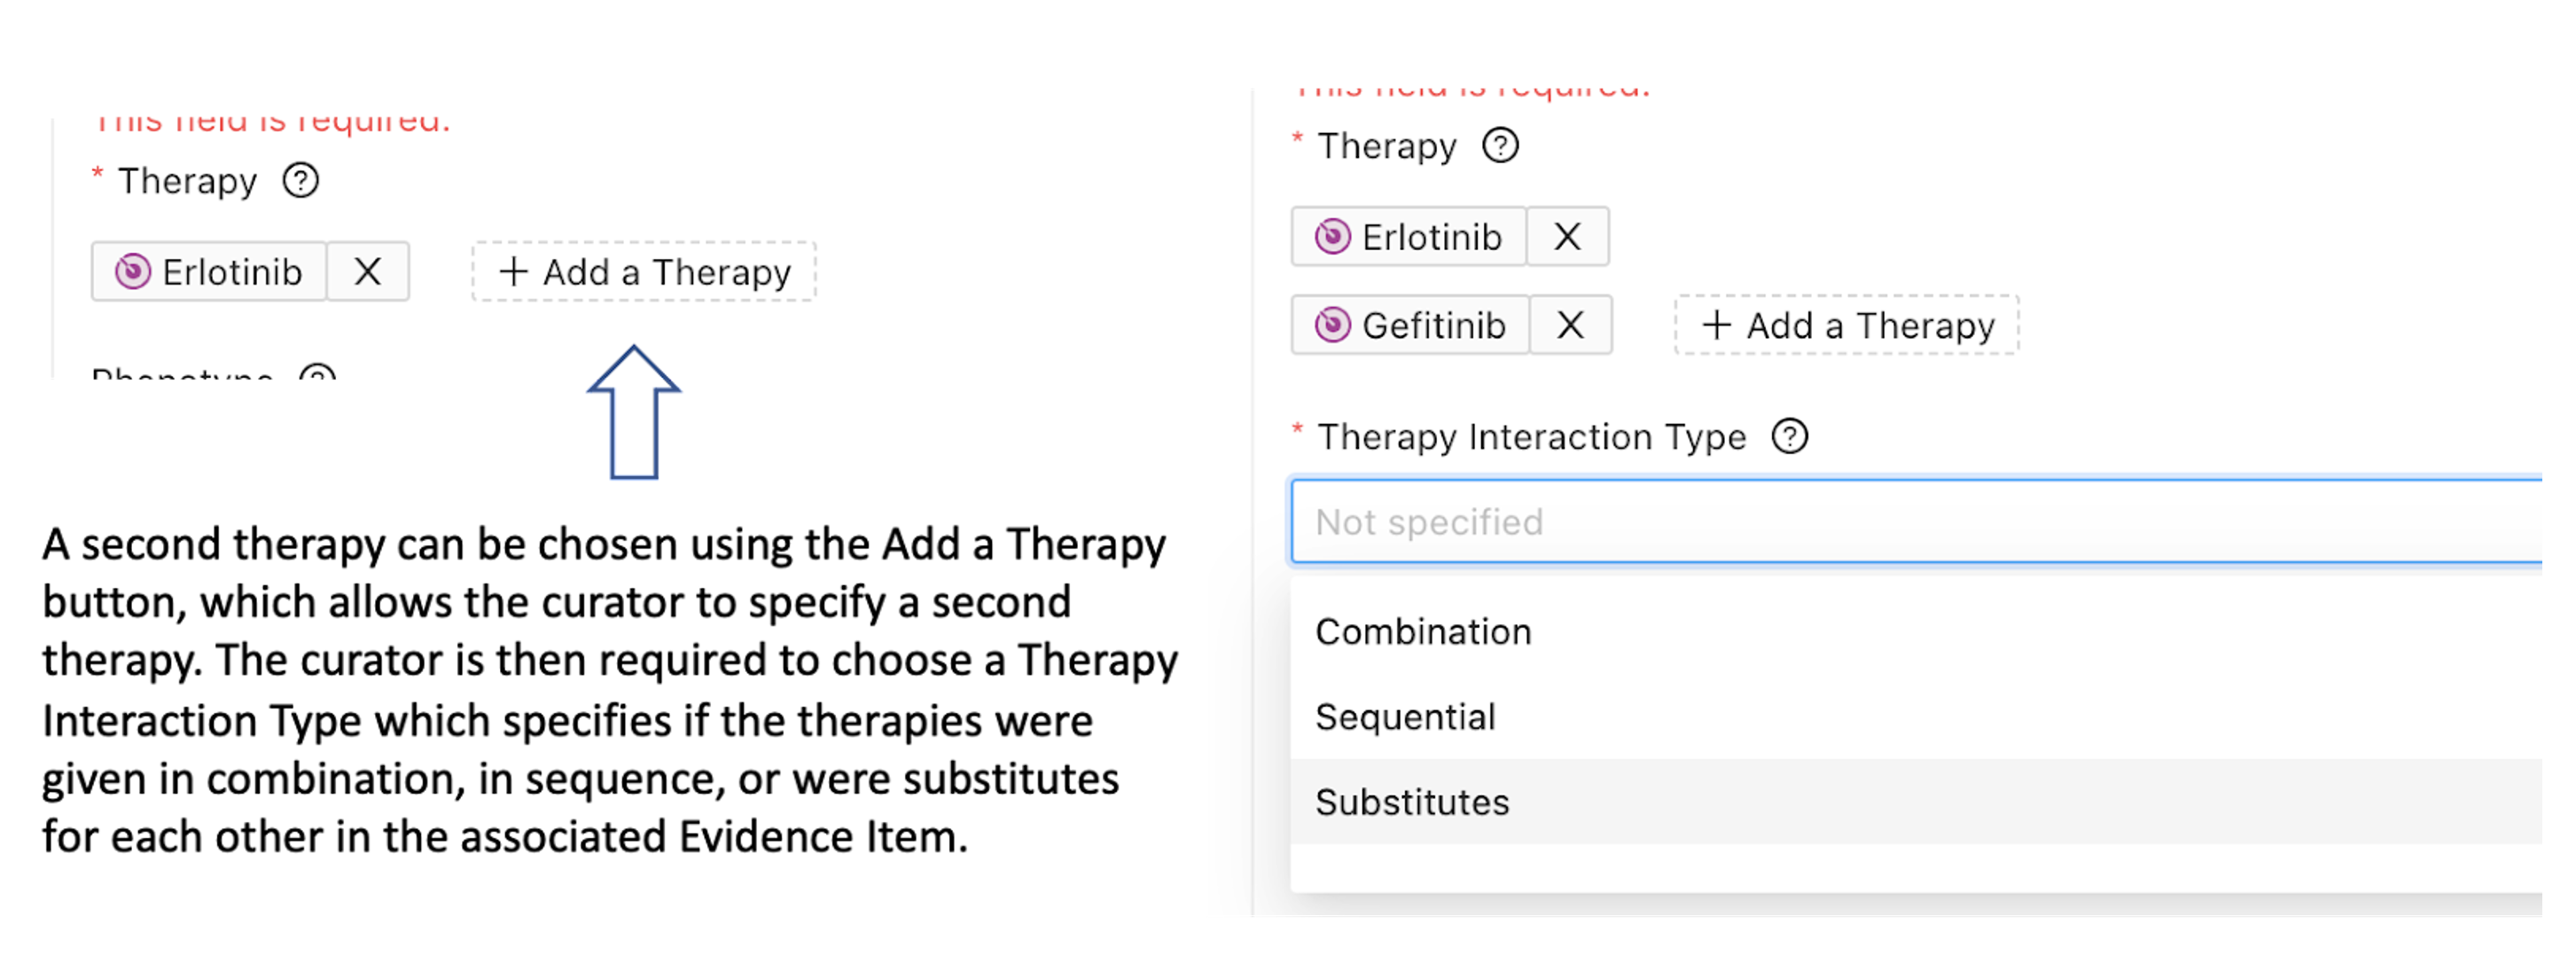 Overview of dding more than one therapy and specifying Therapy Interaction Type